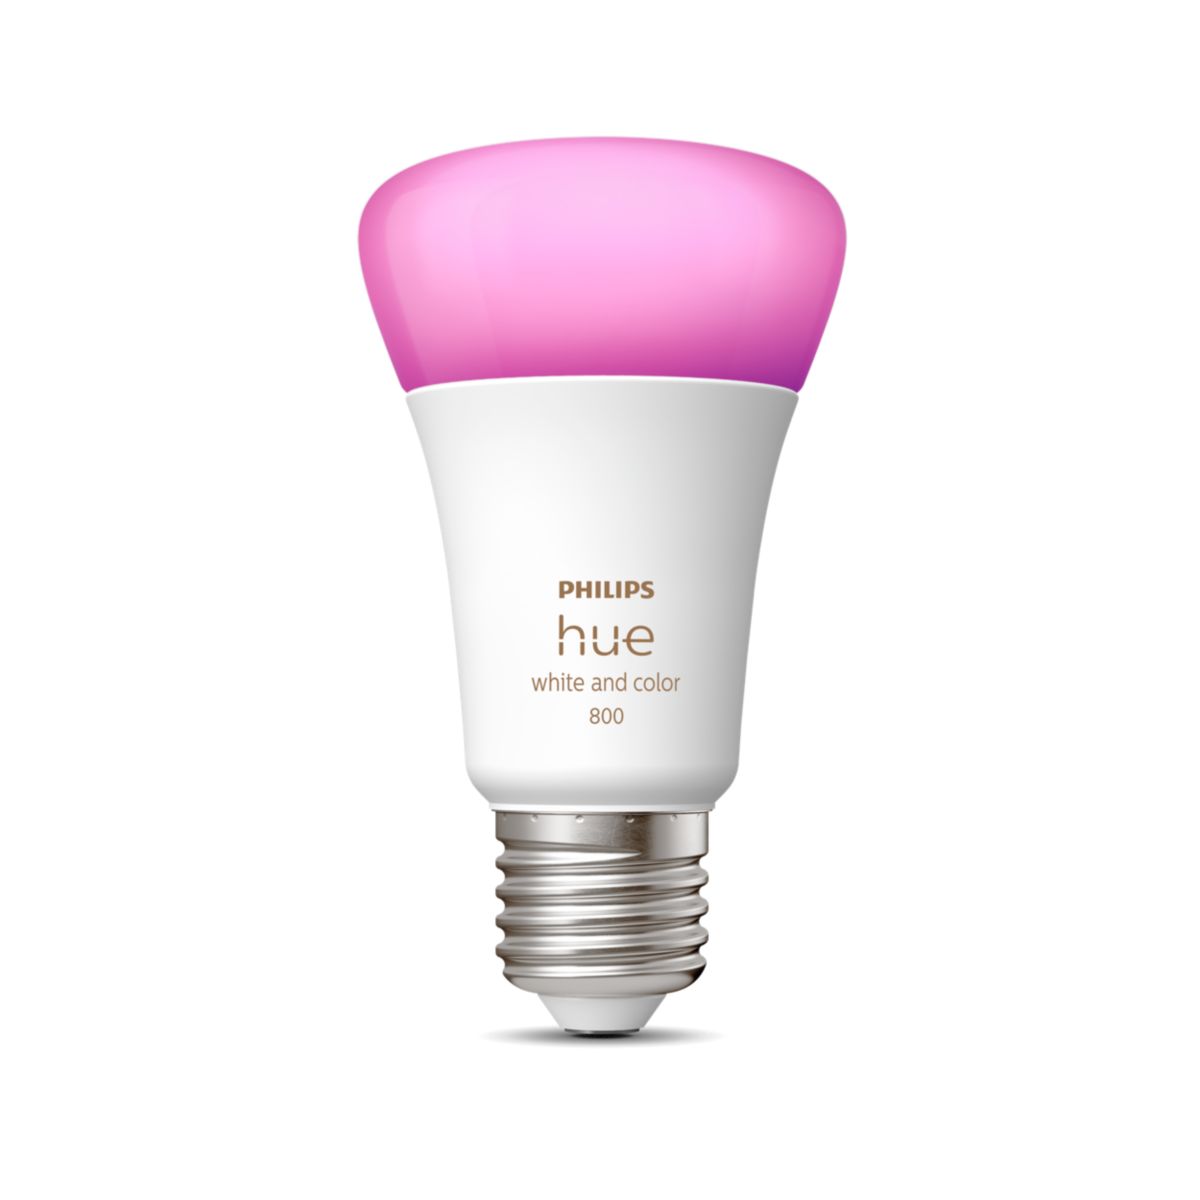 Philips Hue E27 white and color ambiance 800lm